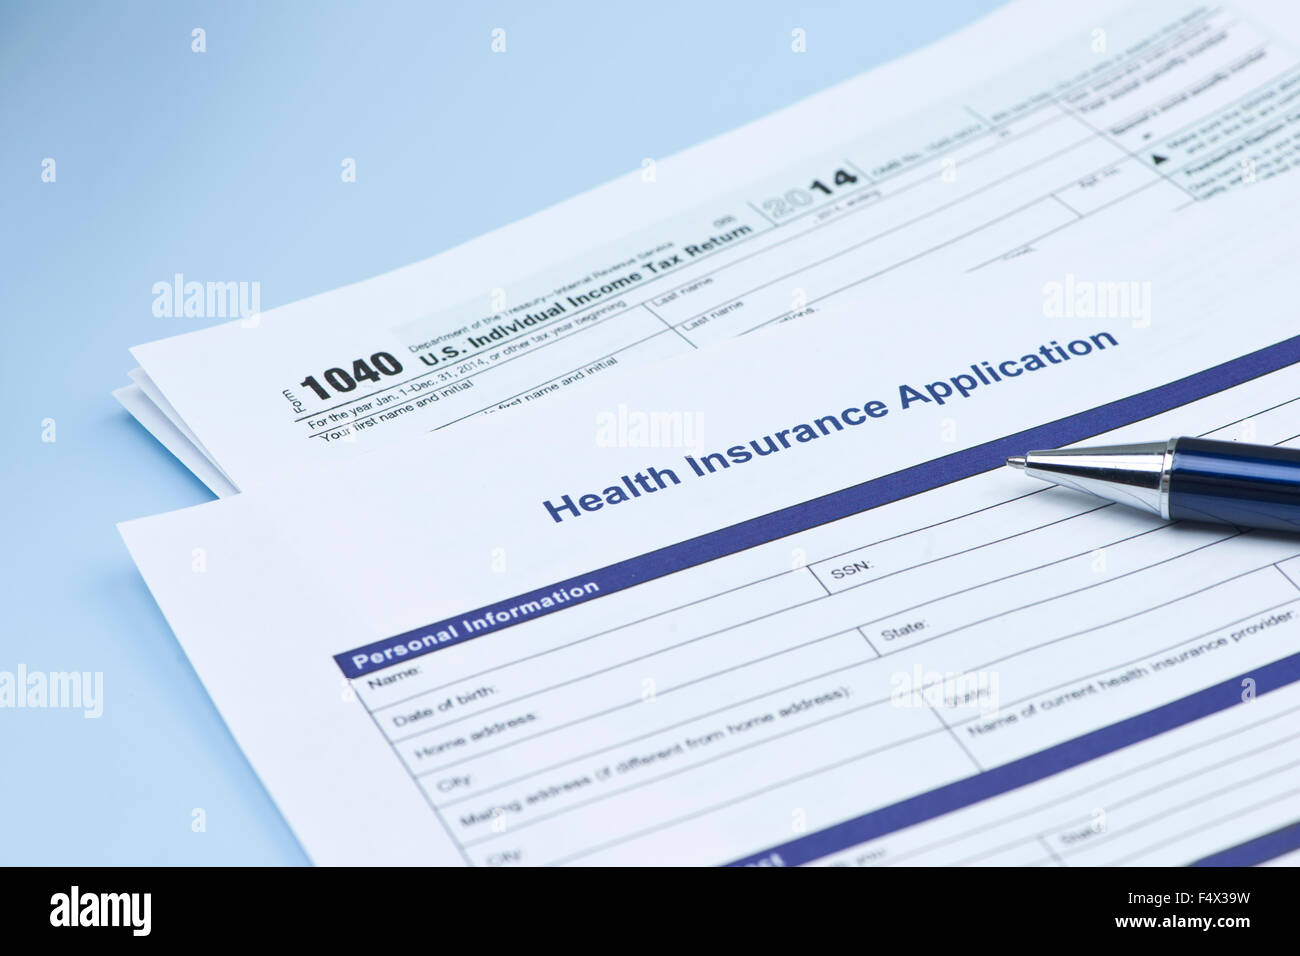 Health insurance application with United States 1040 tax form and pen. Stock Photo